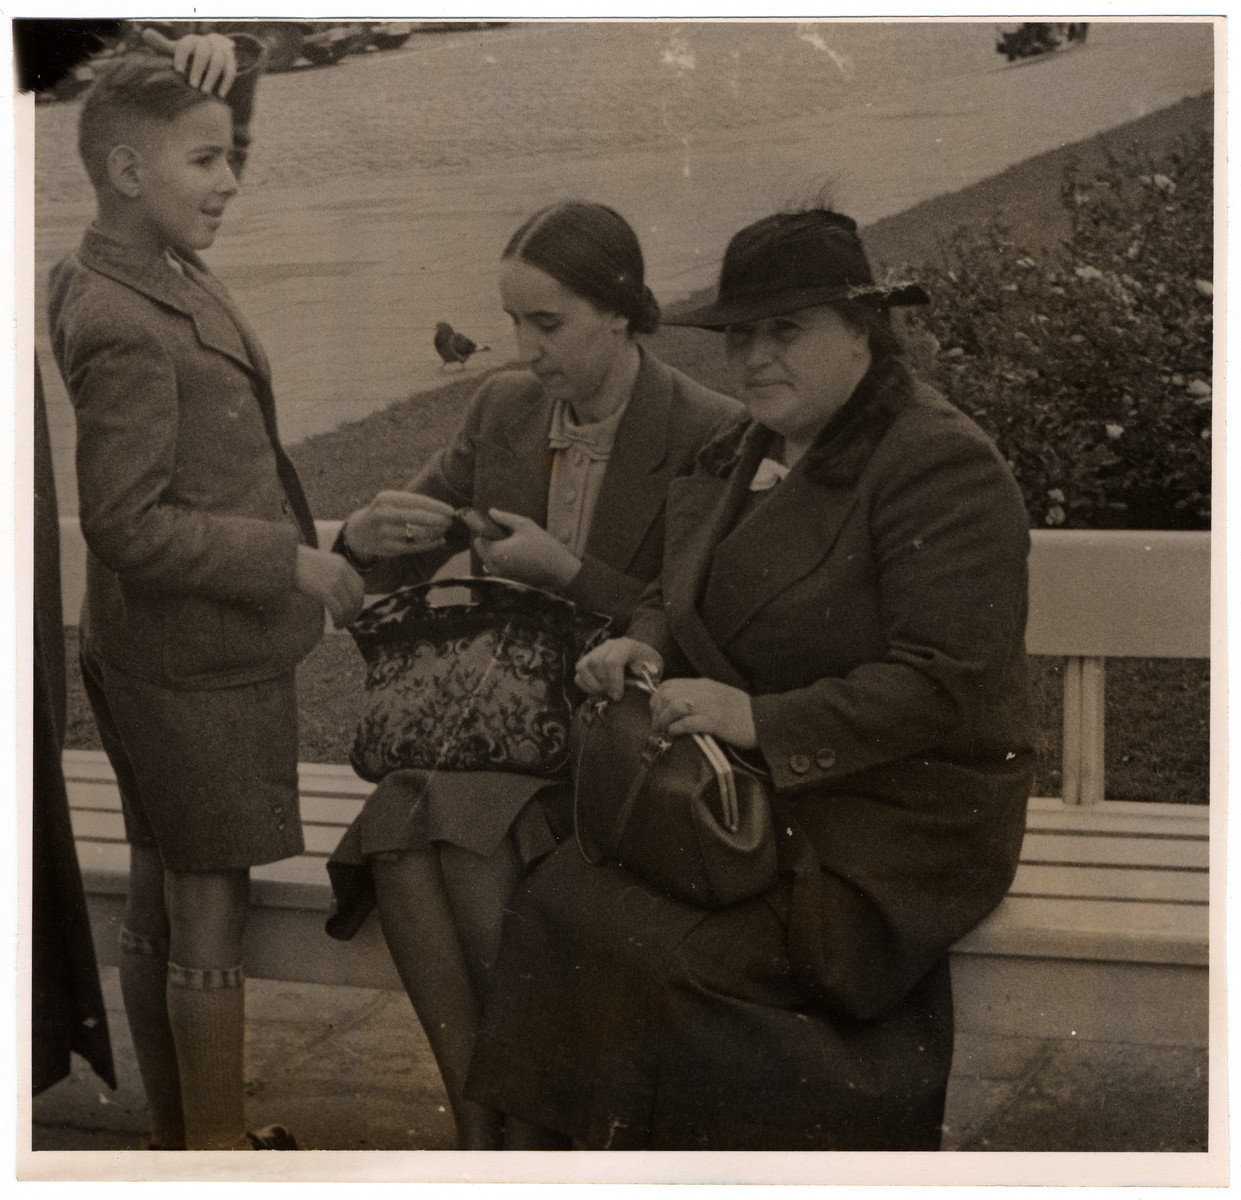 Franz Liebermann and his mother visit a park shortly before they emigrated from Nazi Germany.

Lotte Lieberman is seated on the left.  Her mother Hedwig Orgler is on the right.